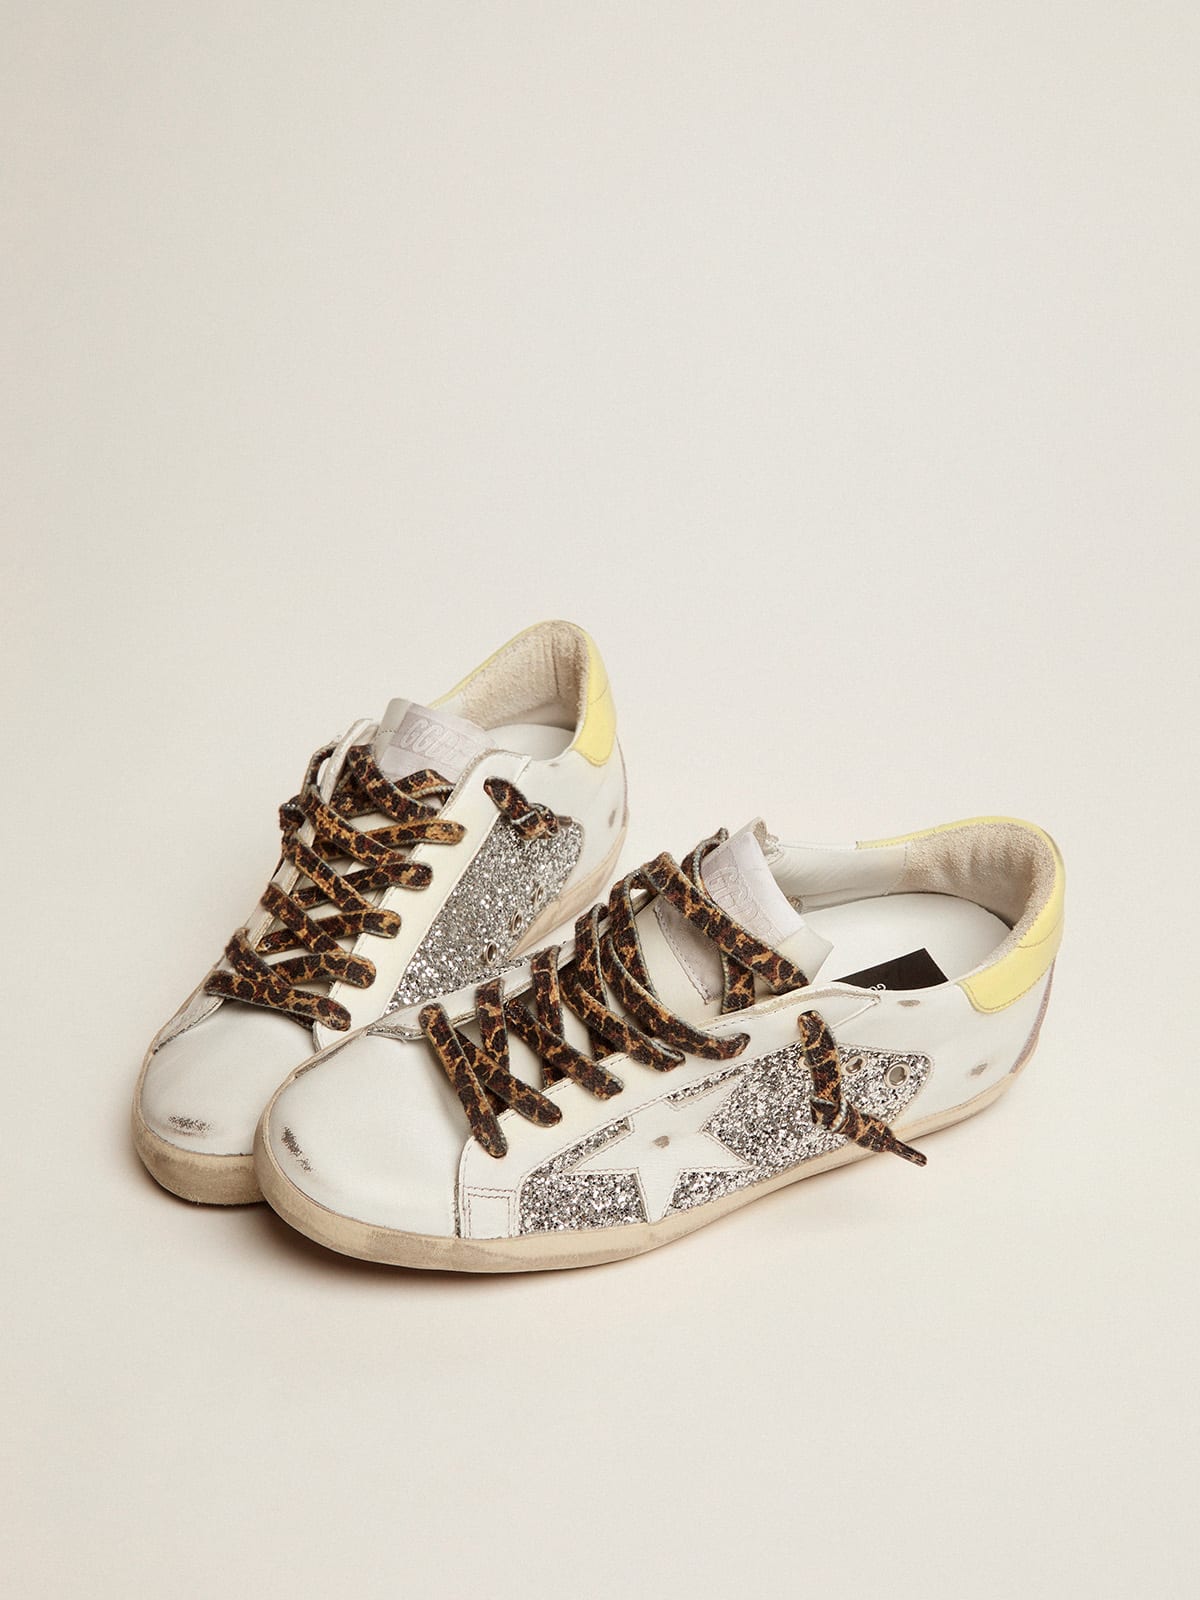 LTD Super-Star Sneakers in leather and glitter with colorful heel tab |  Golden Goose